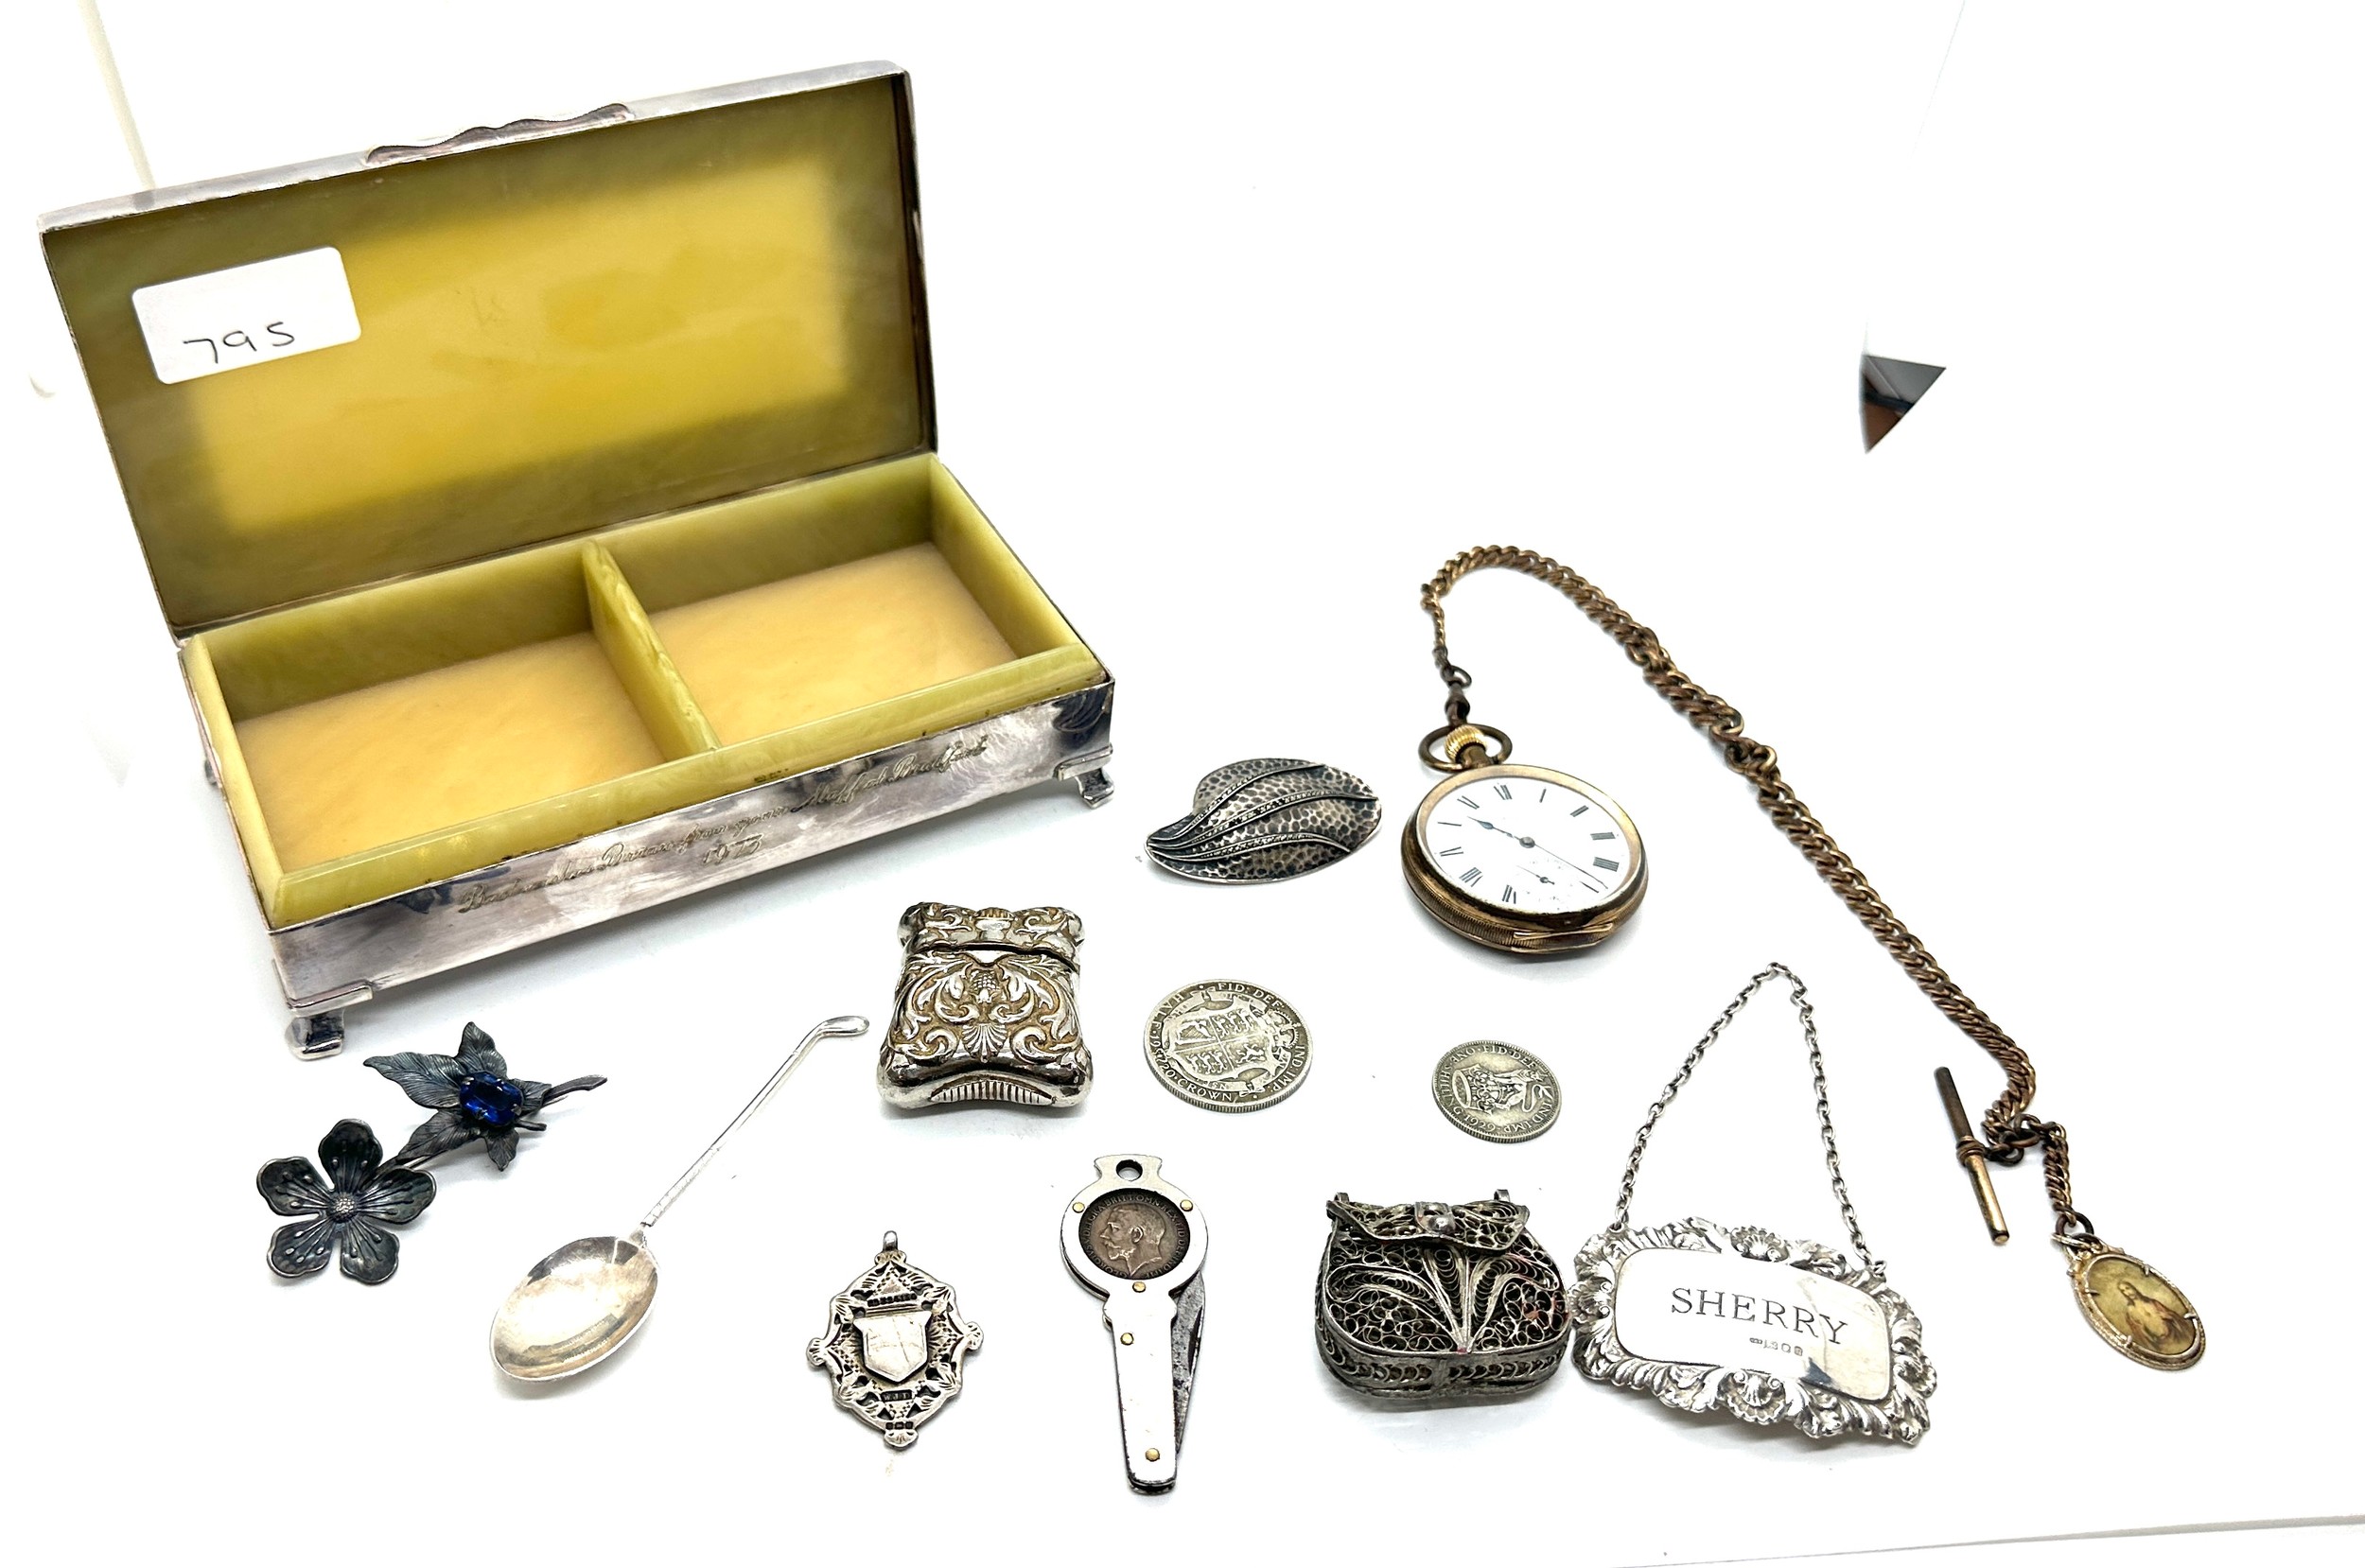 Selection of collectables includes Pocket watch, silver items etc